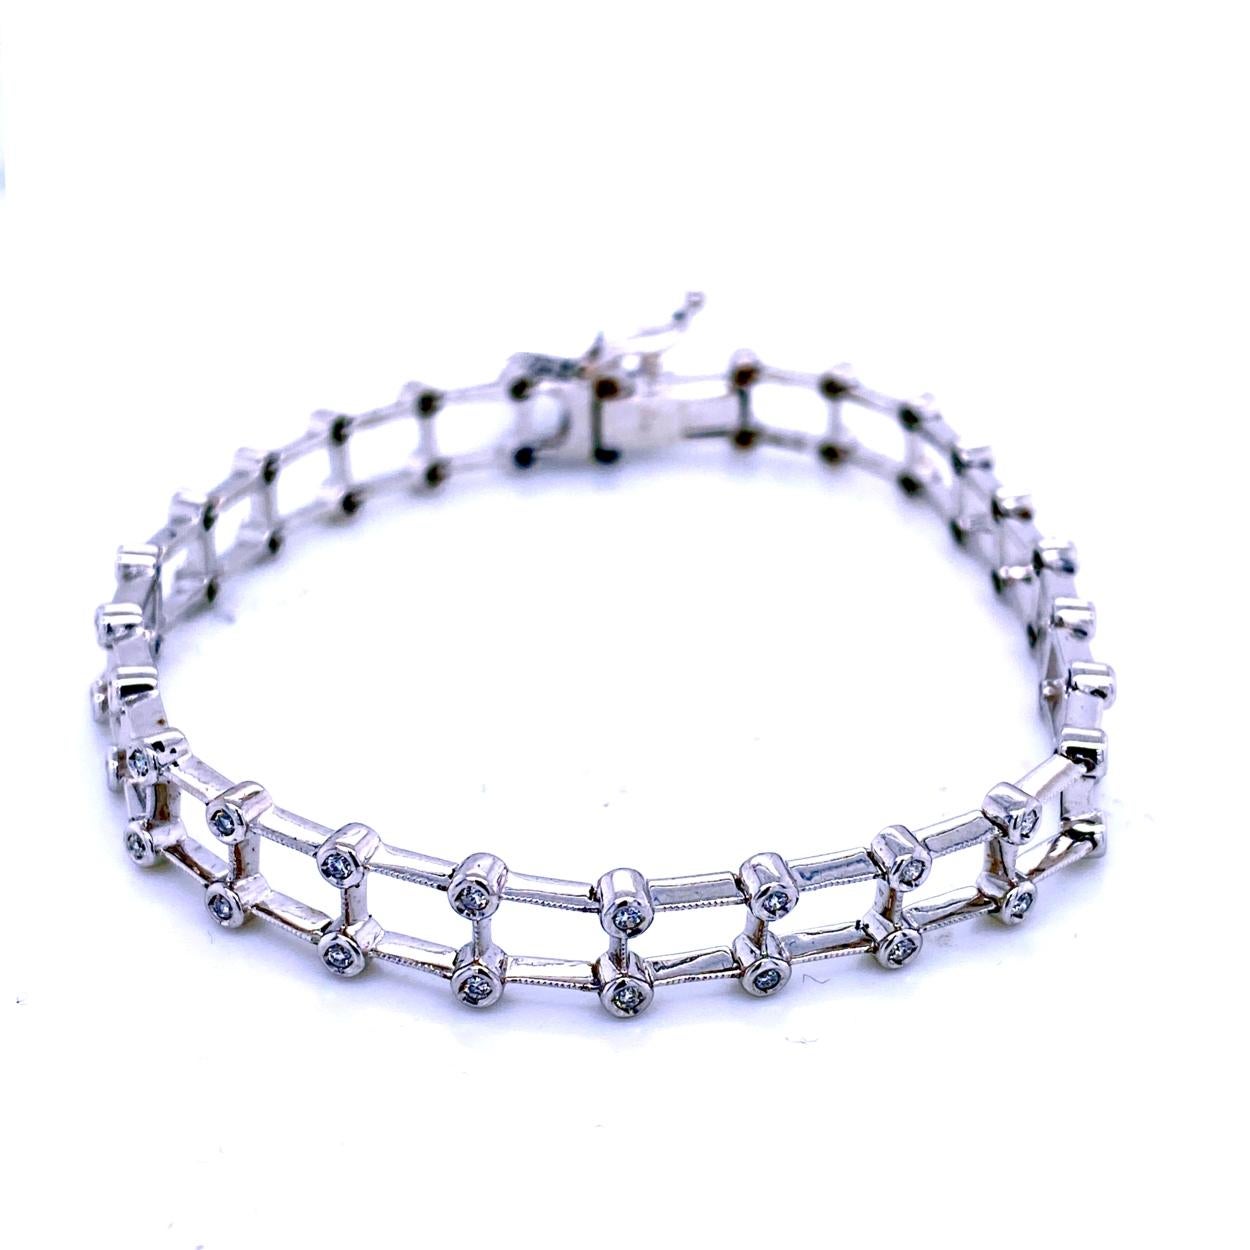 This Diamond Bracelet consists of 26 Links of Milgrained Edge Bezel Set Round Brilliant diamonds set in Platinum.   The bracelet comes with a  Built-in safety lock to protect it from loss. 
Total Weight of diamonds: 0.50 Ct 
Total Weight of